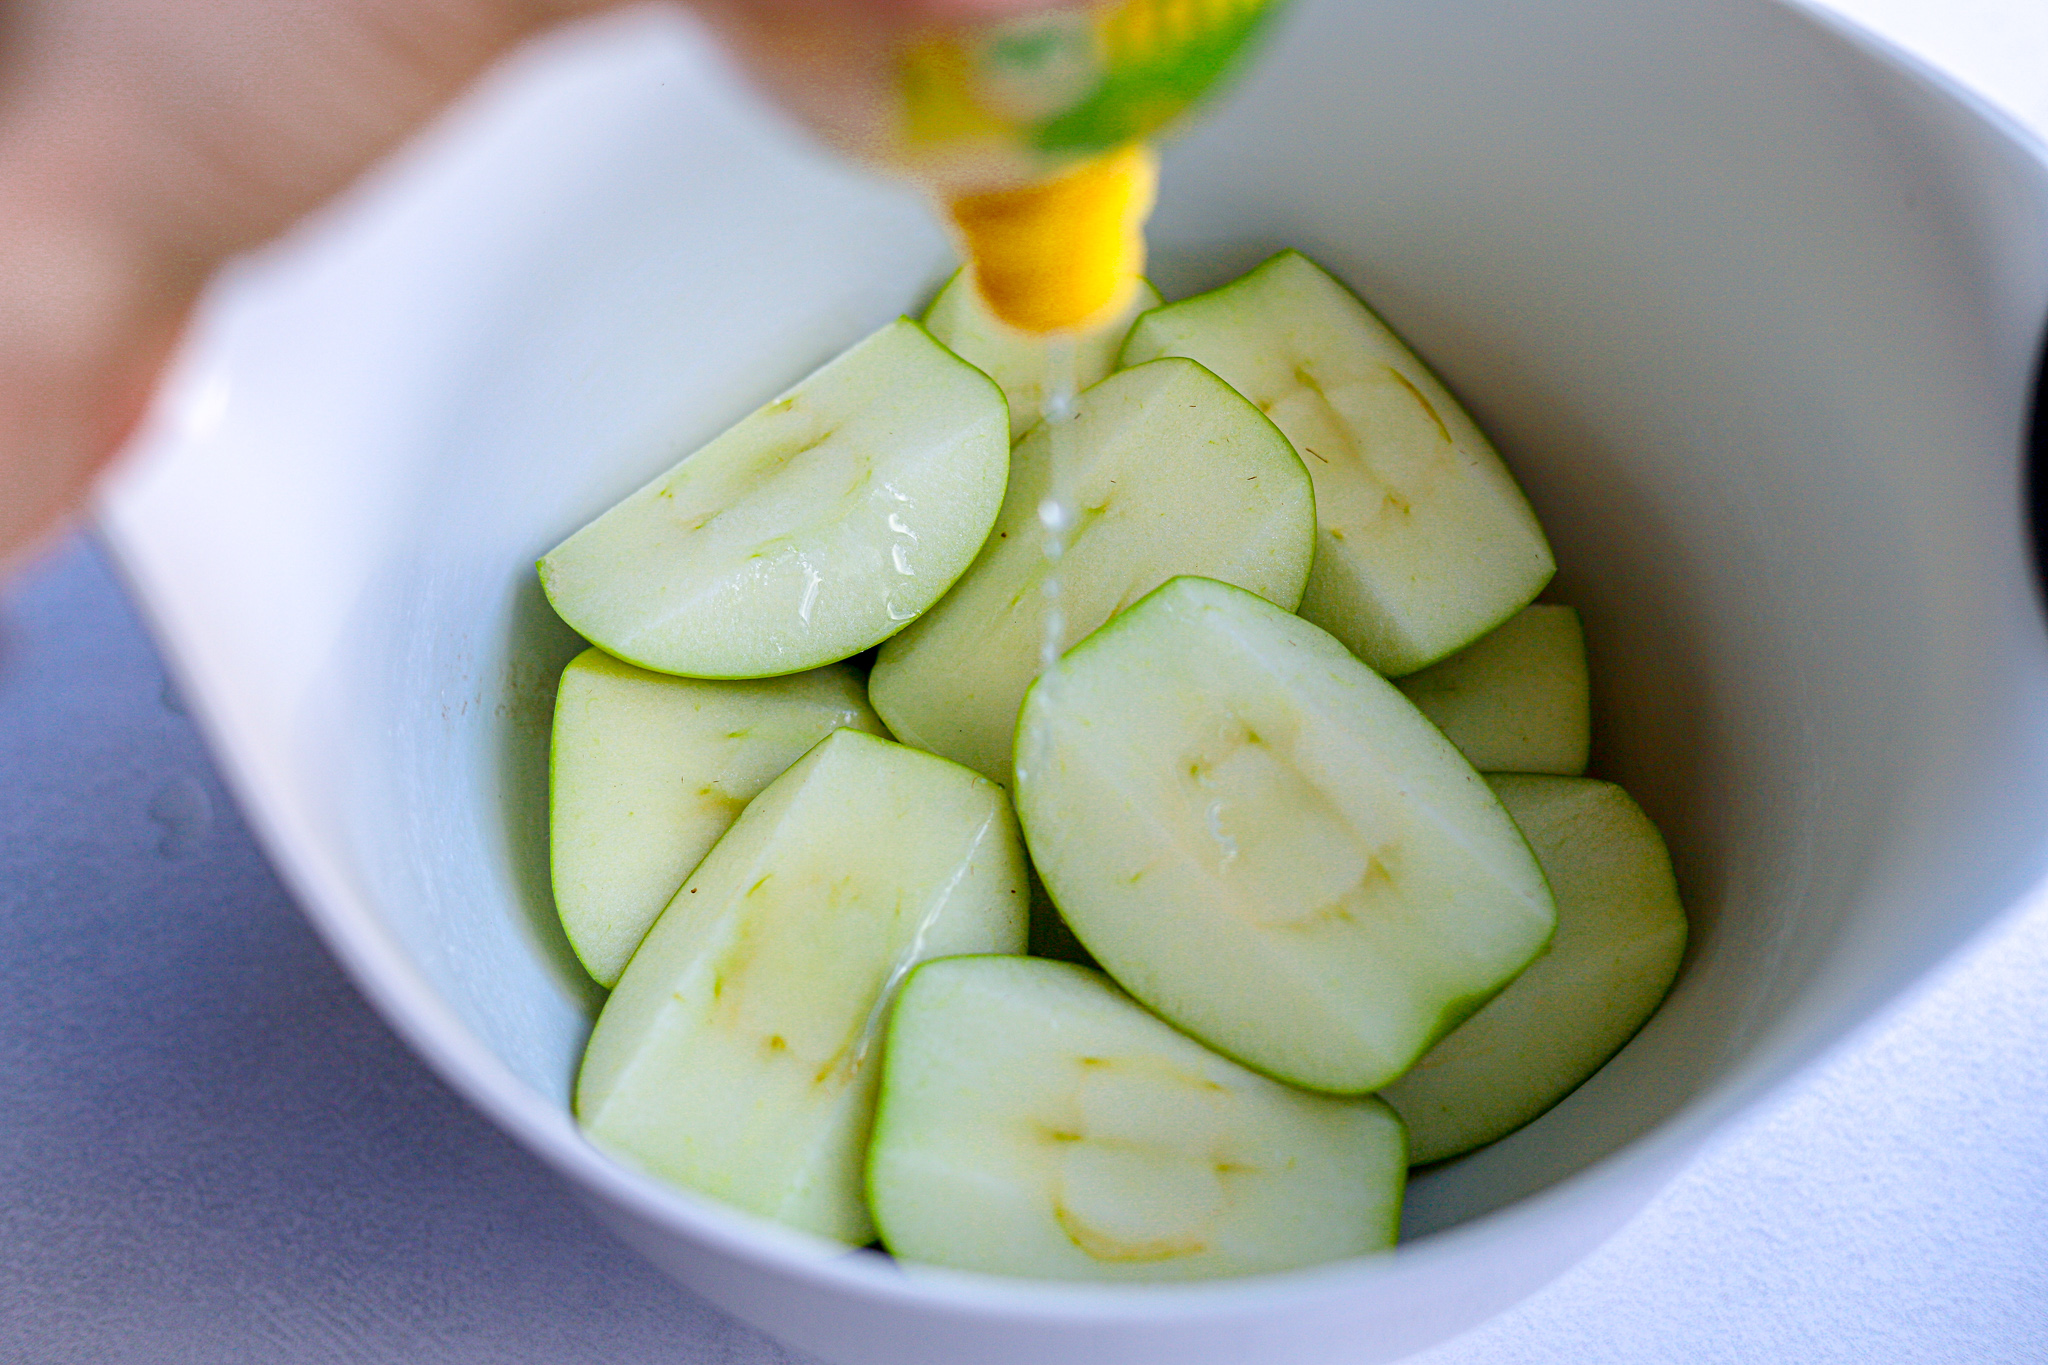 Bowl of green Granny Smith apples cut into quarters. A bottle of lemon juice hovers above, squeezing juice onto the apples.